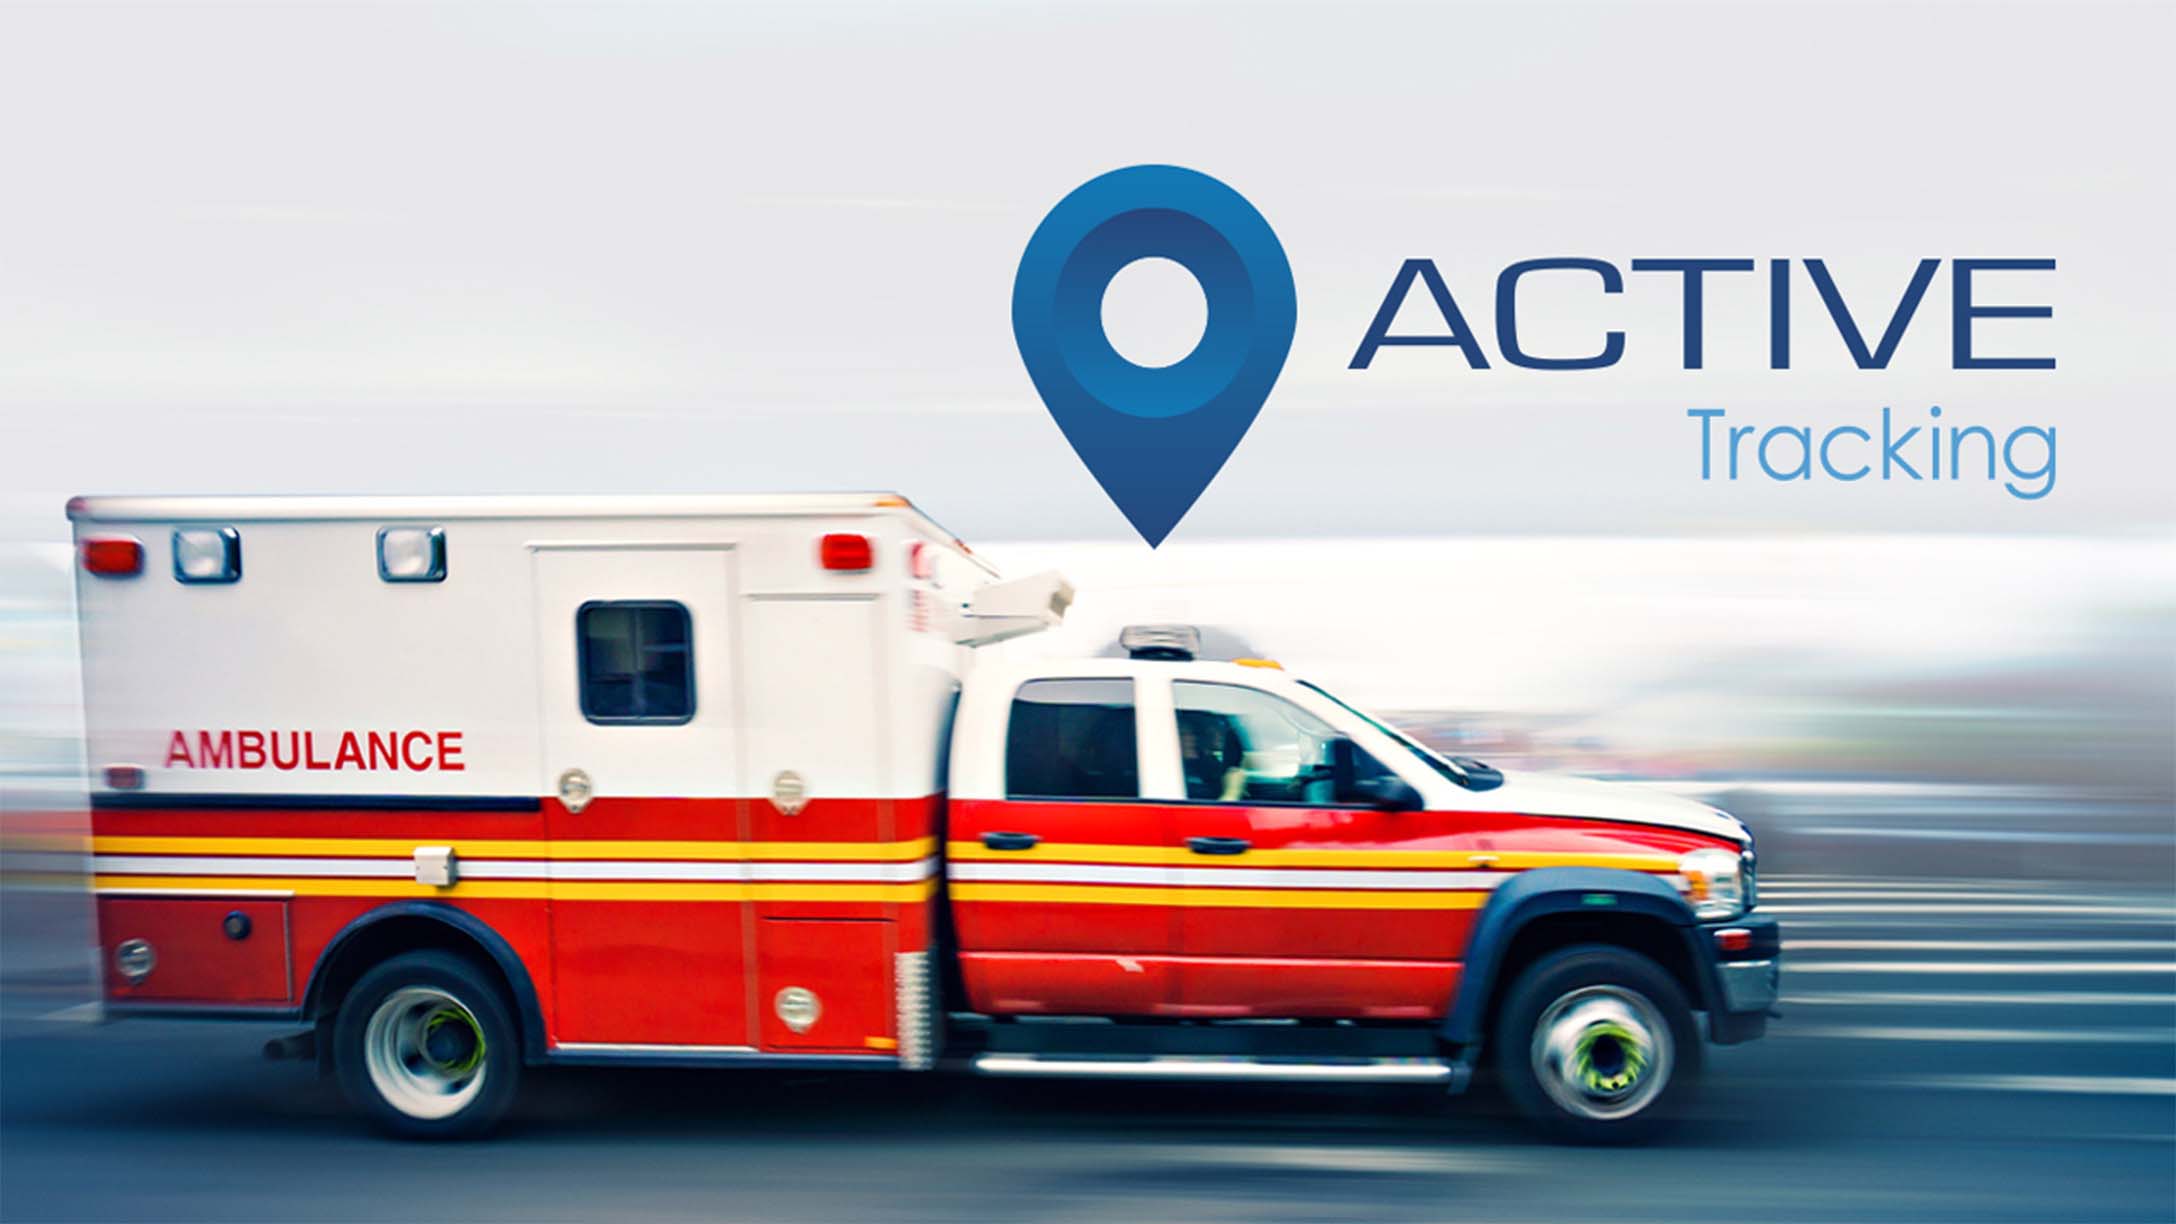 Ambulance driving with Geotab Active Tracking Logo above it